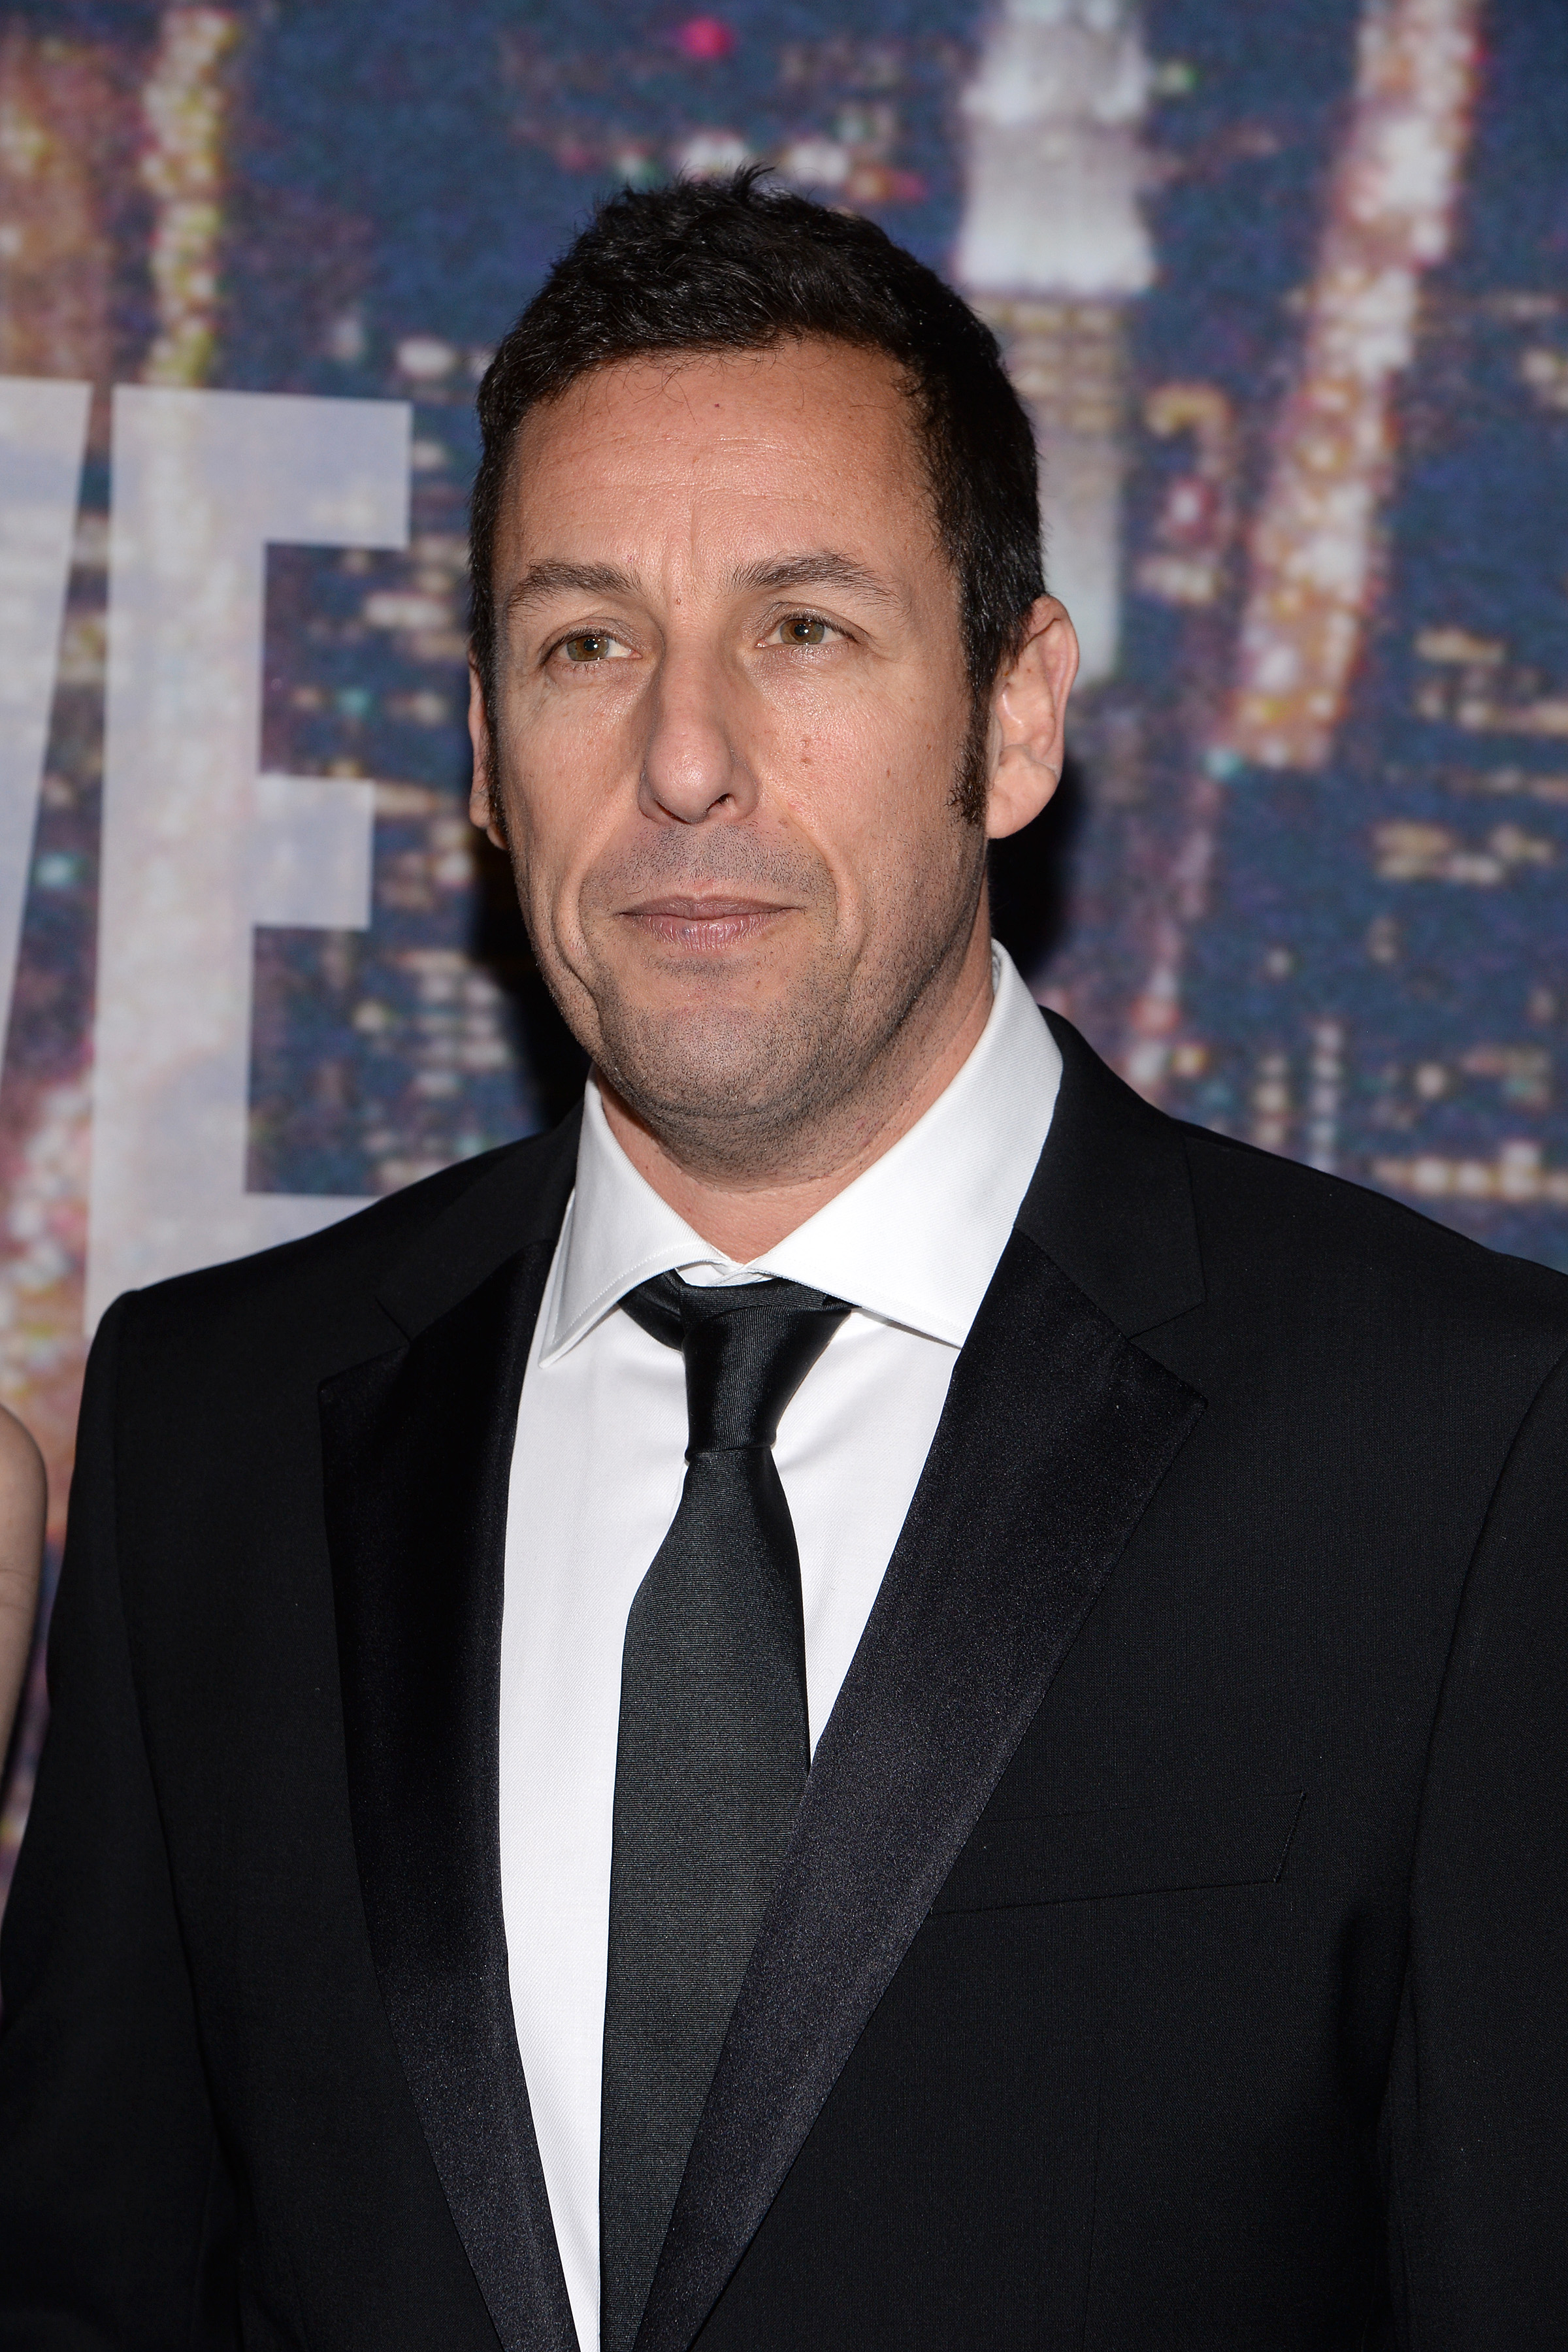 Actor Adam Sandler attends the SNL 40th Anniversary Special at 30 Rockefeller Plaza in New York, NY, on Feb. 15, 2015